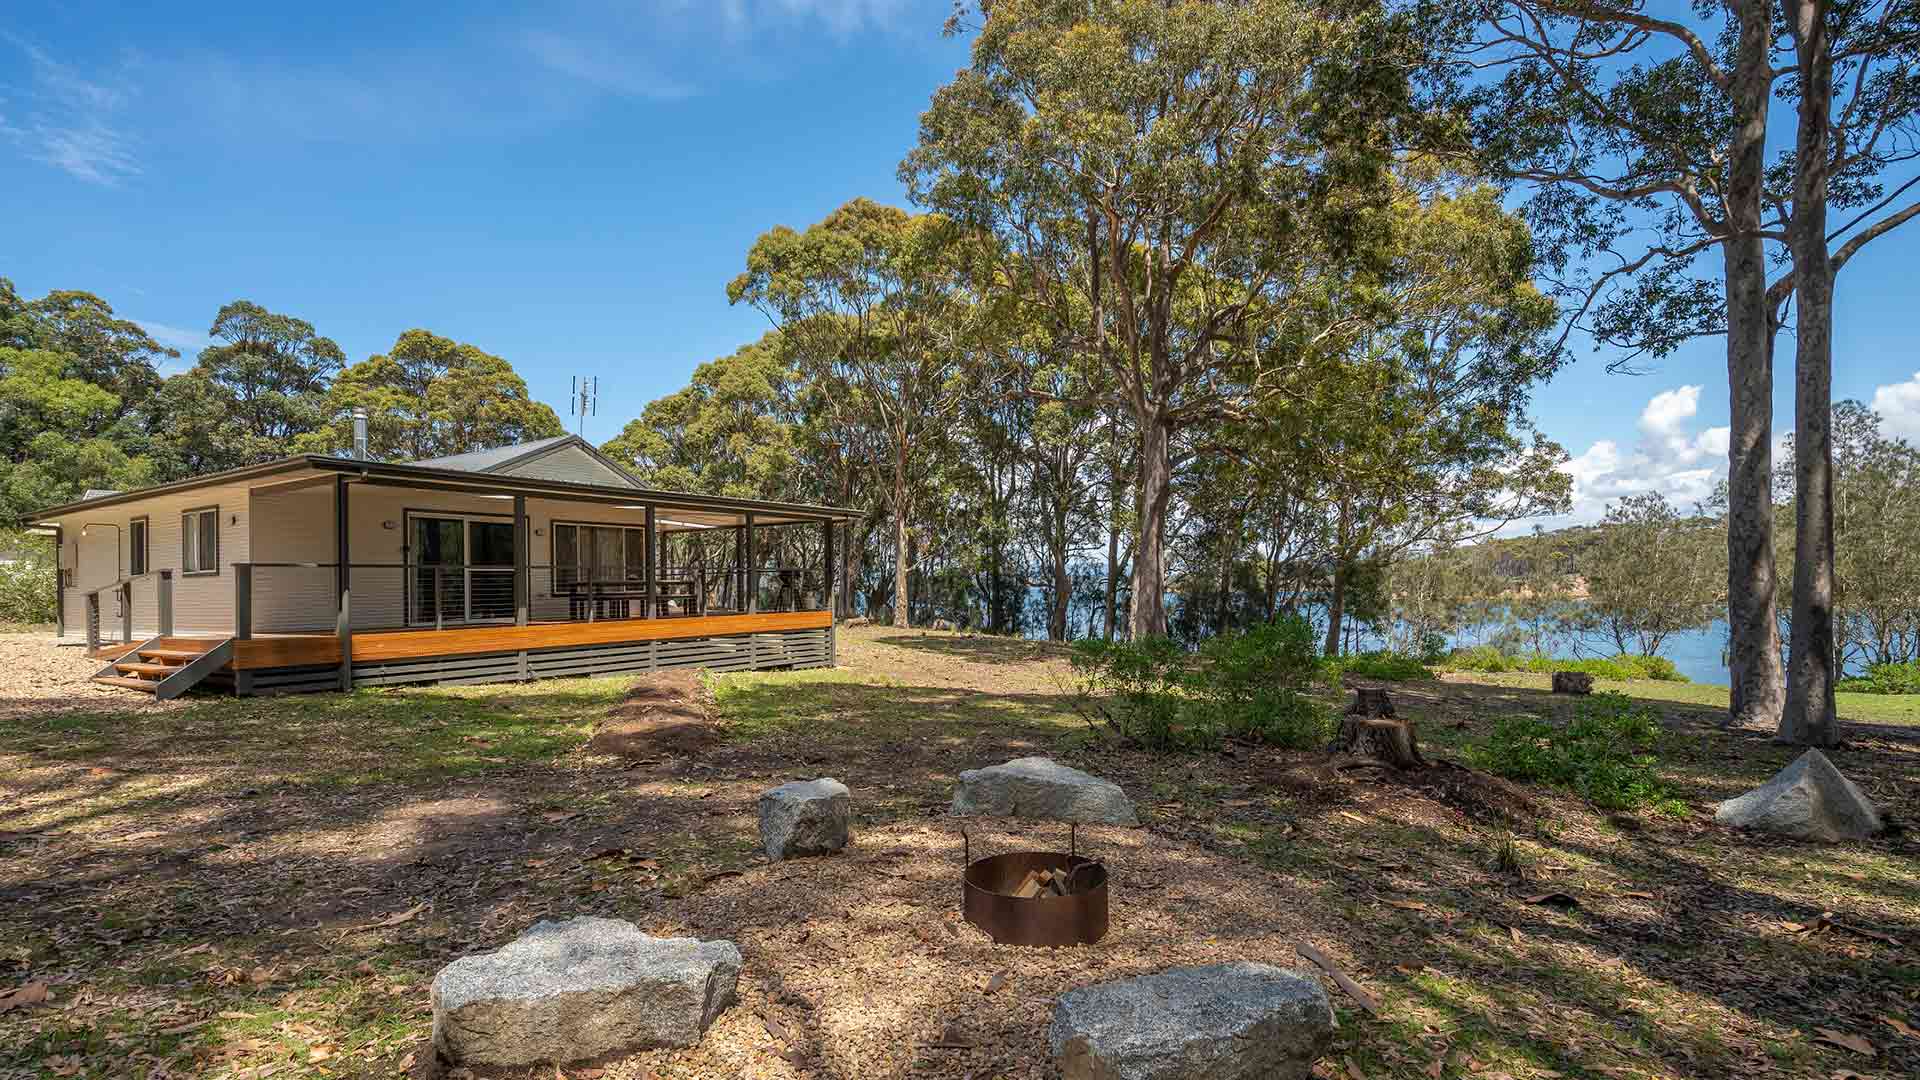 You Can Now Stay in This Refurbished Beach House in the South Coast's Murramarang National Park